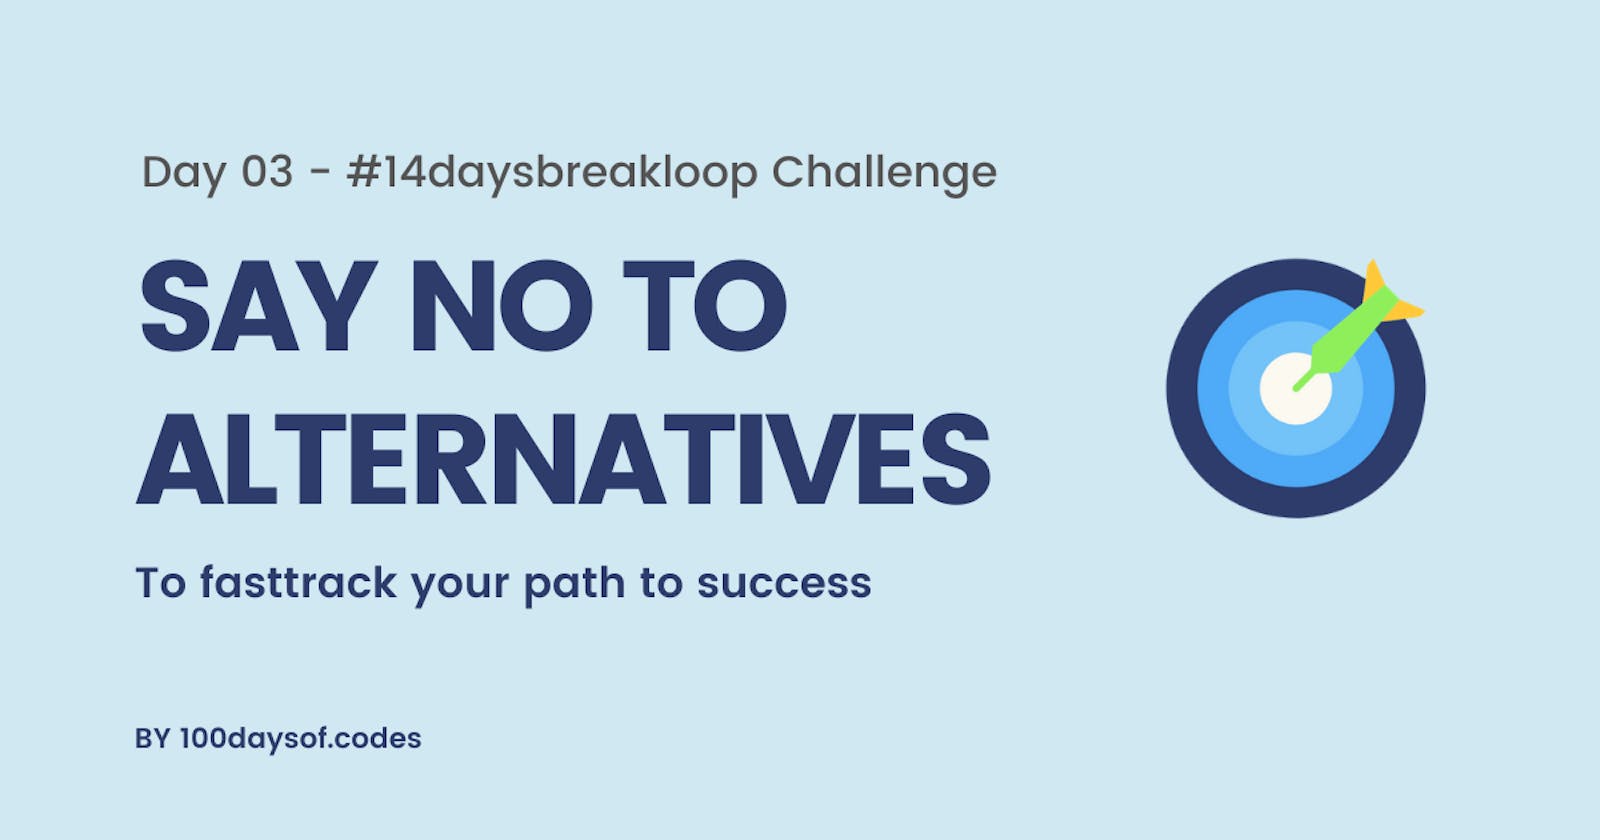 If you want to follow your goals, learn to say no to alternatives